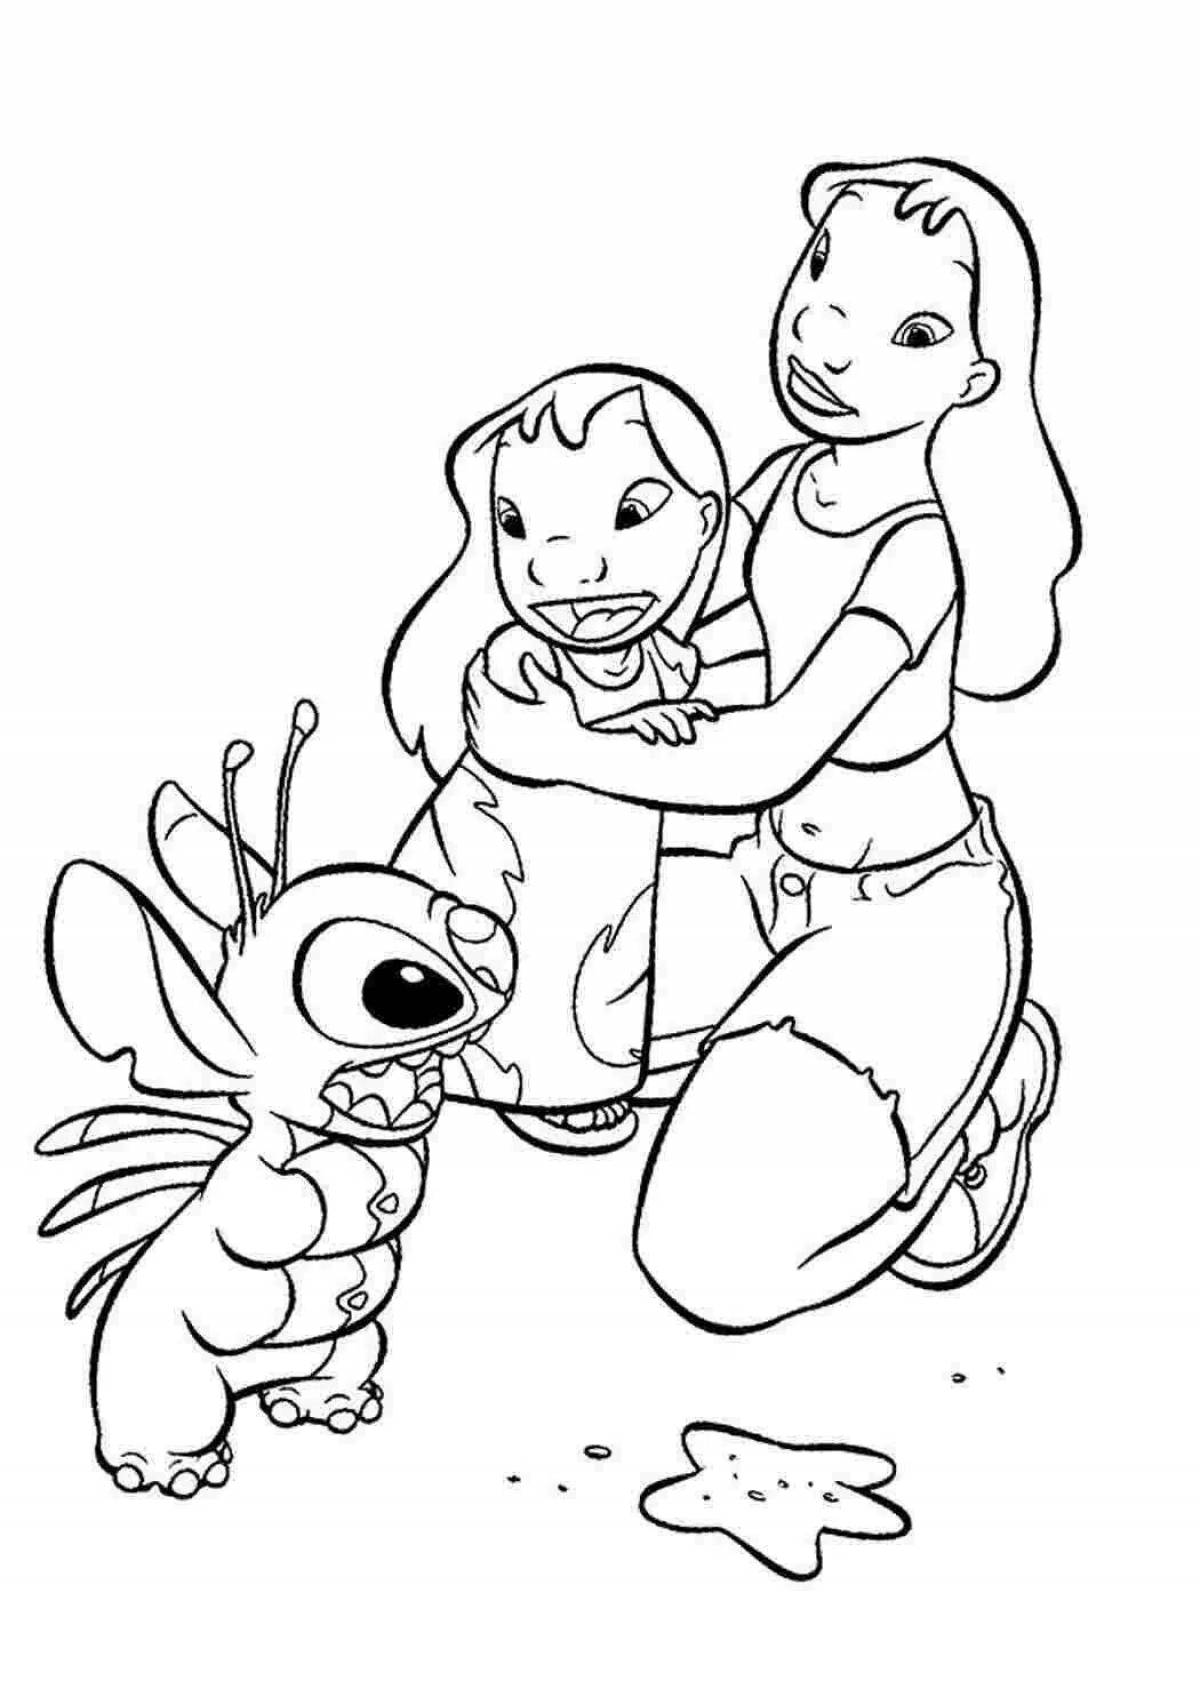 Beautiful stitch for girls coloring book